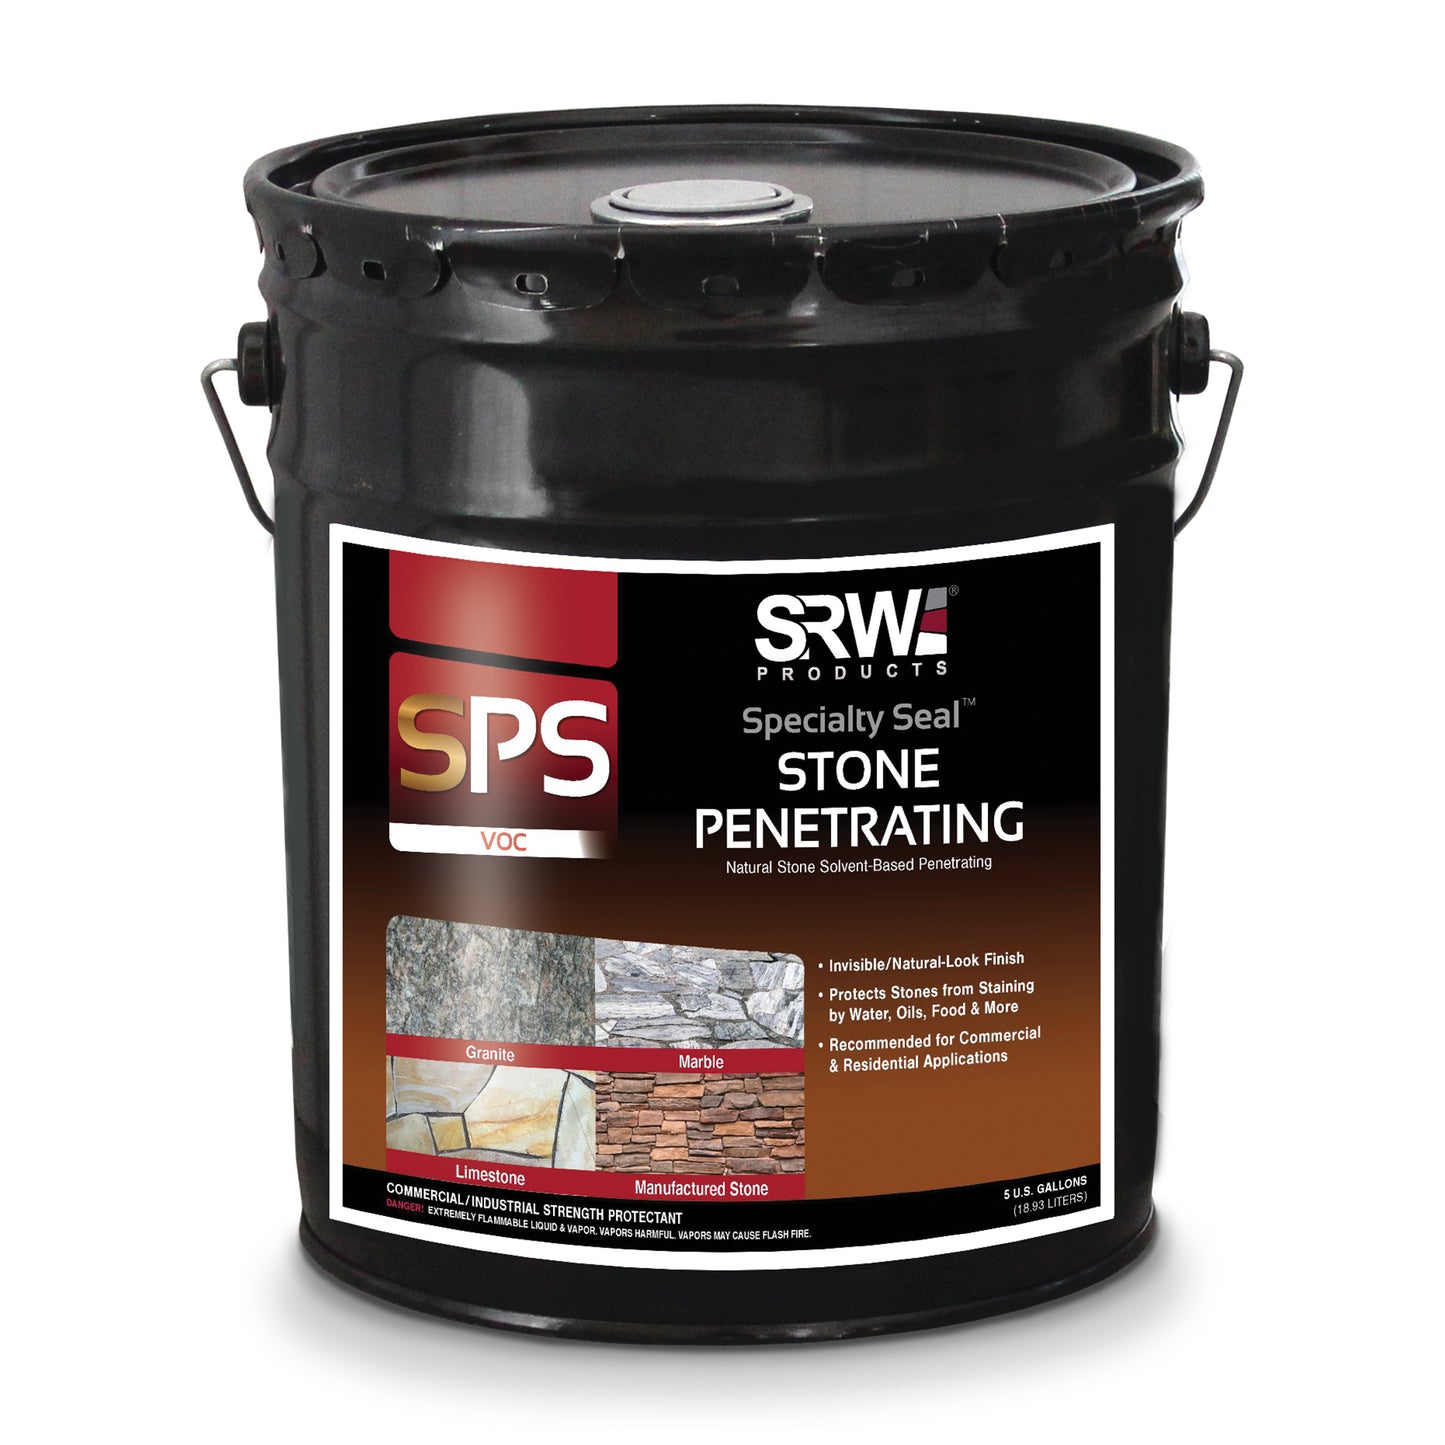 SRW Products S-PS VOC Stone Penetrating - Specialty Seal™ bucket